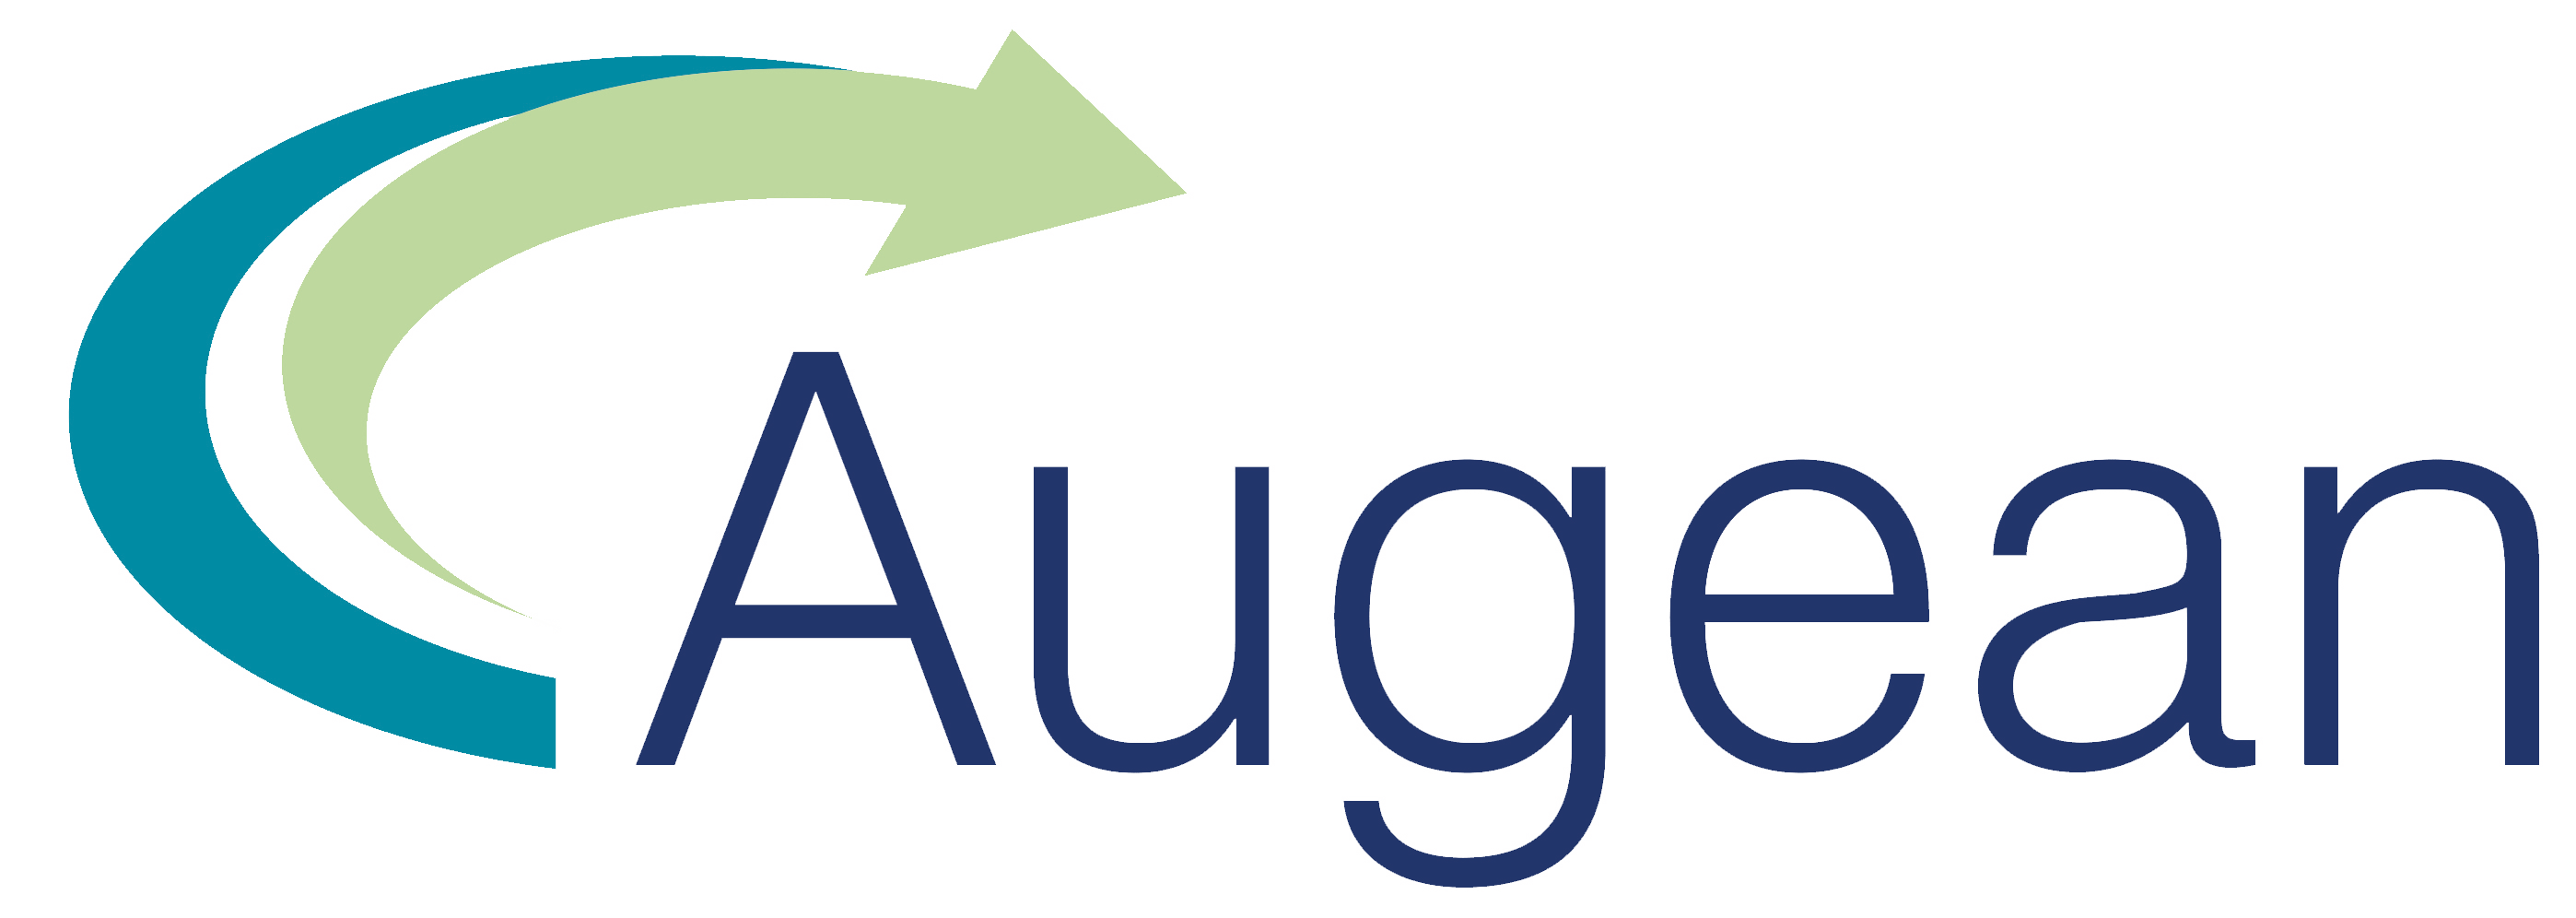 Future Industrial Services part of Augean Group Logo